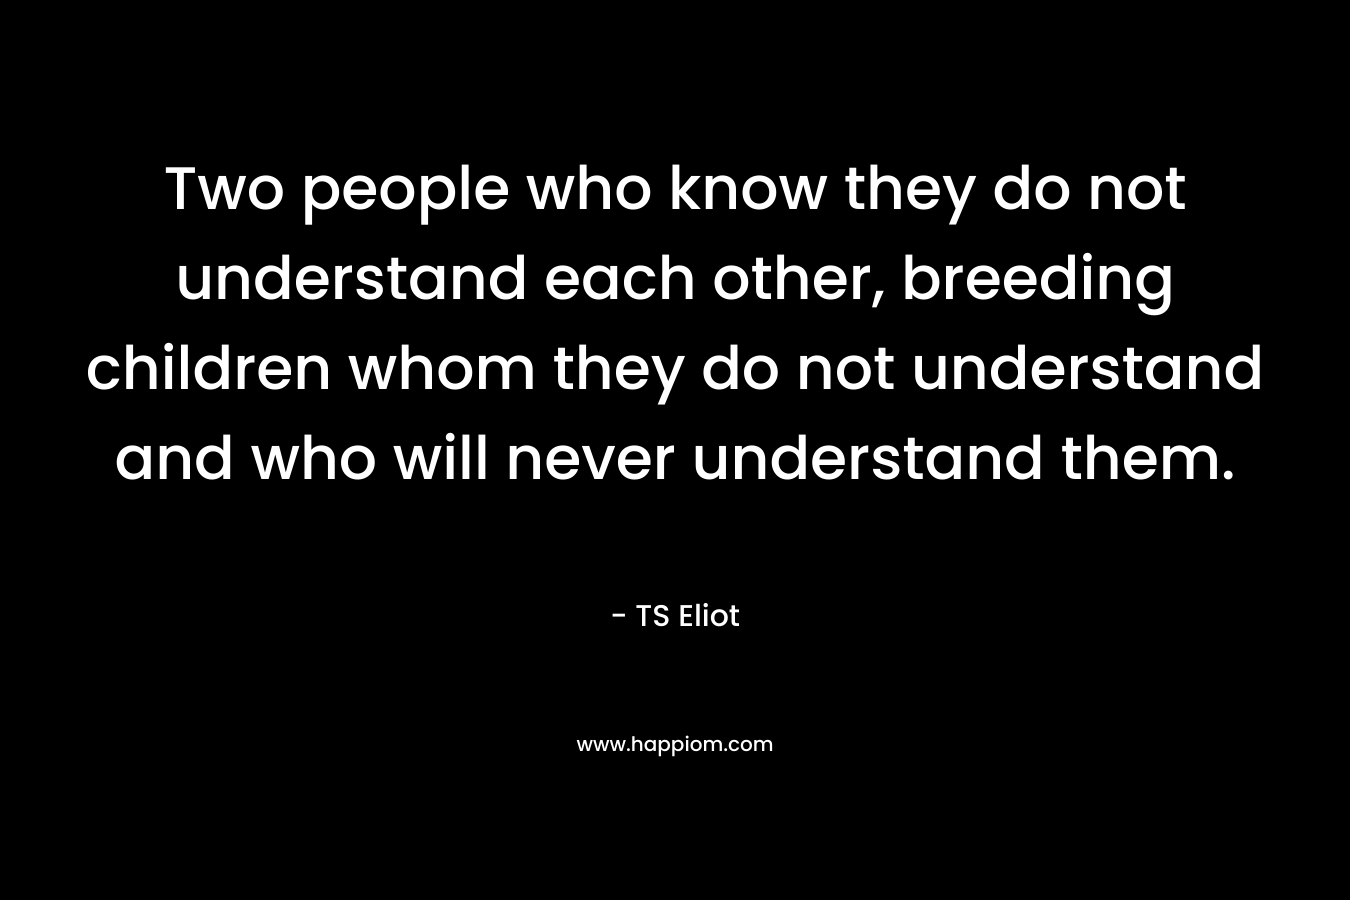 Two people who know they do not understand each other, breeding children whom they do not understand and who will never understand them.